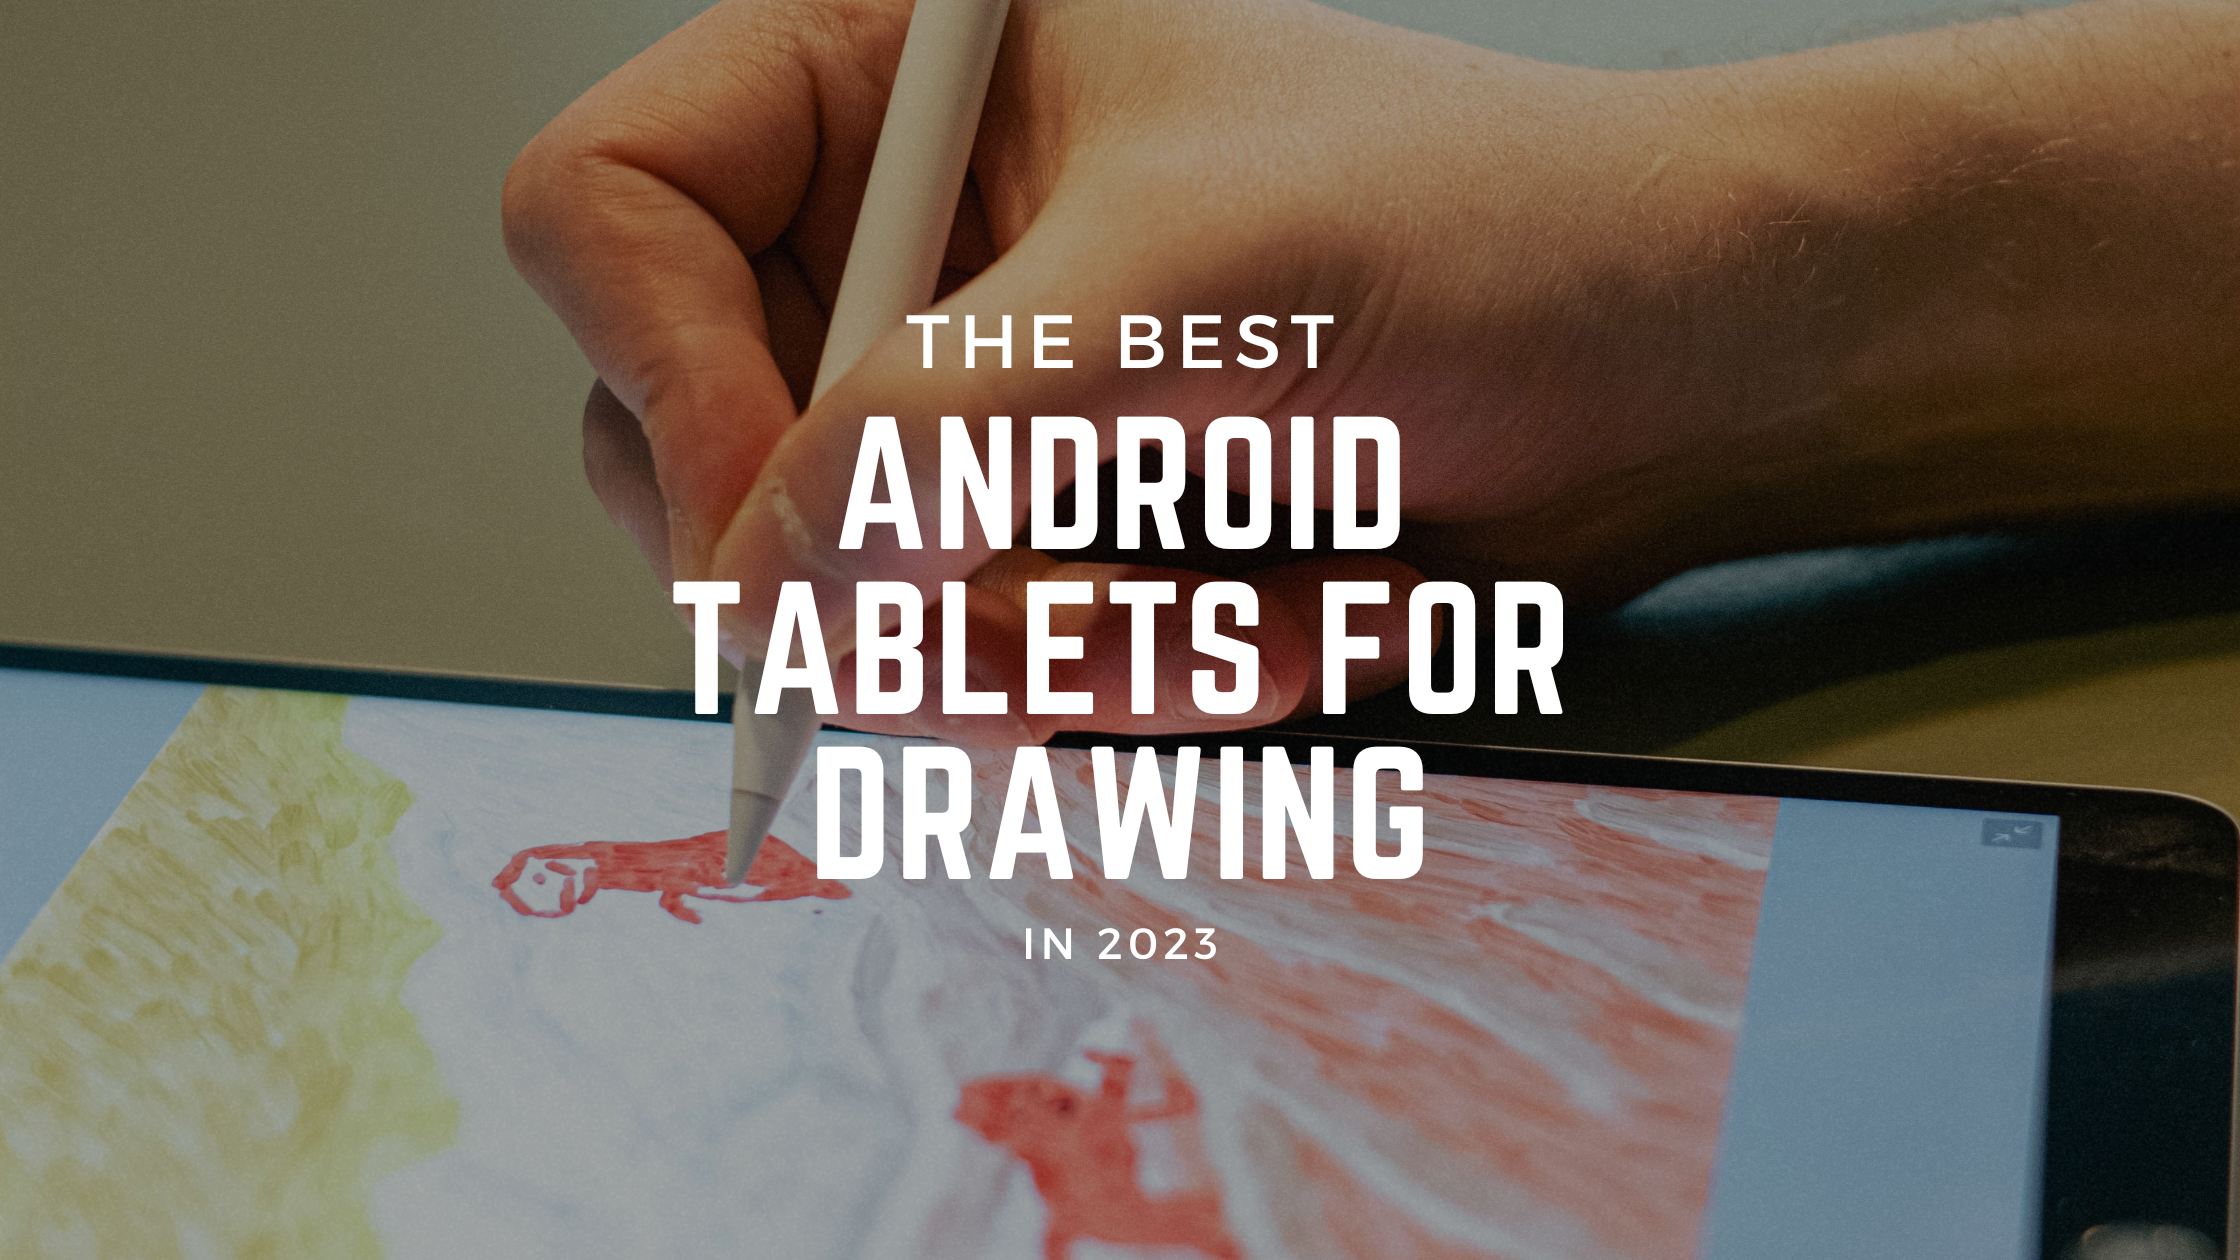 The Best Android Tablets For Drawing in 2023 - Doodlers Anonymous